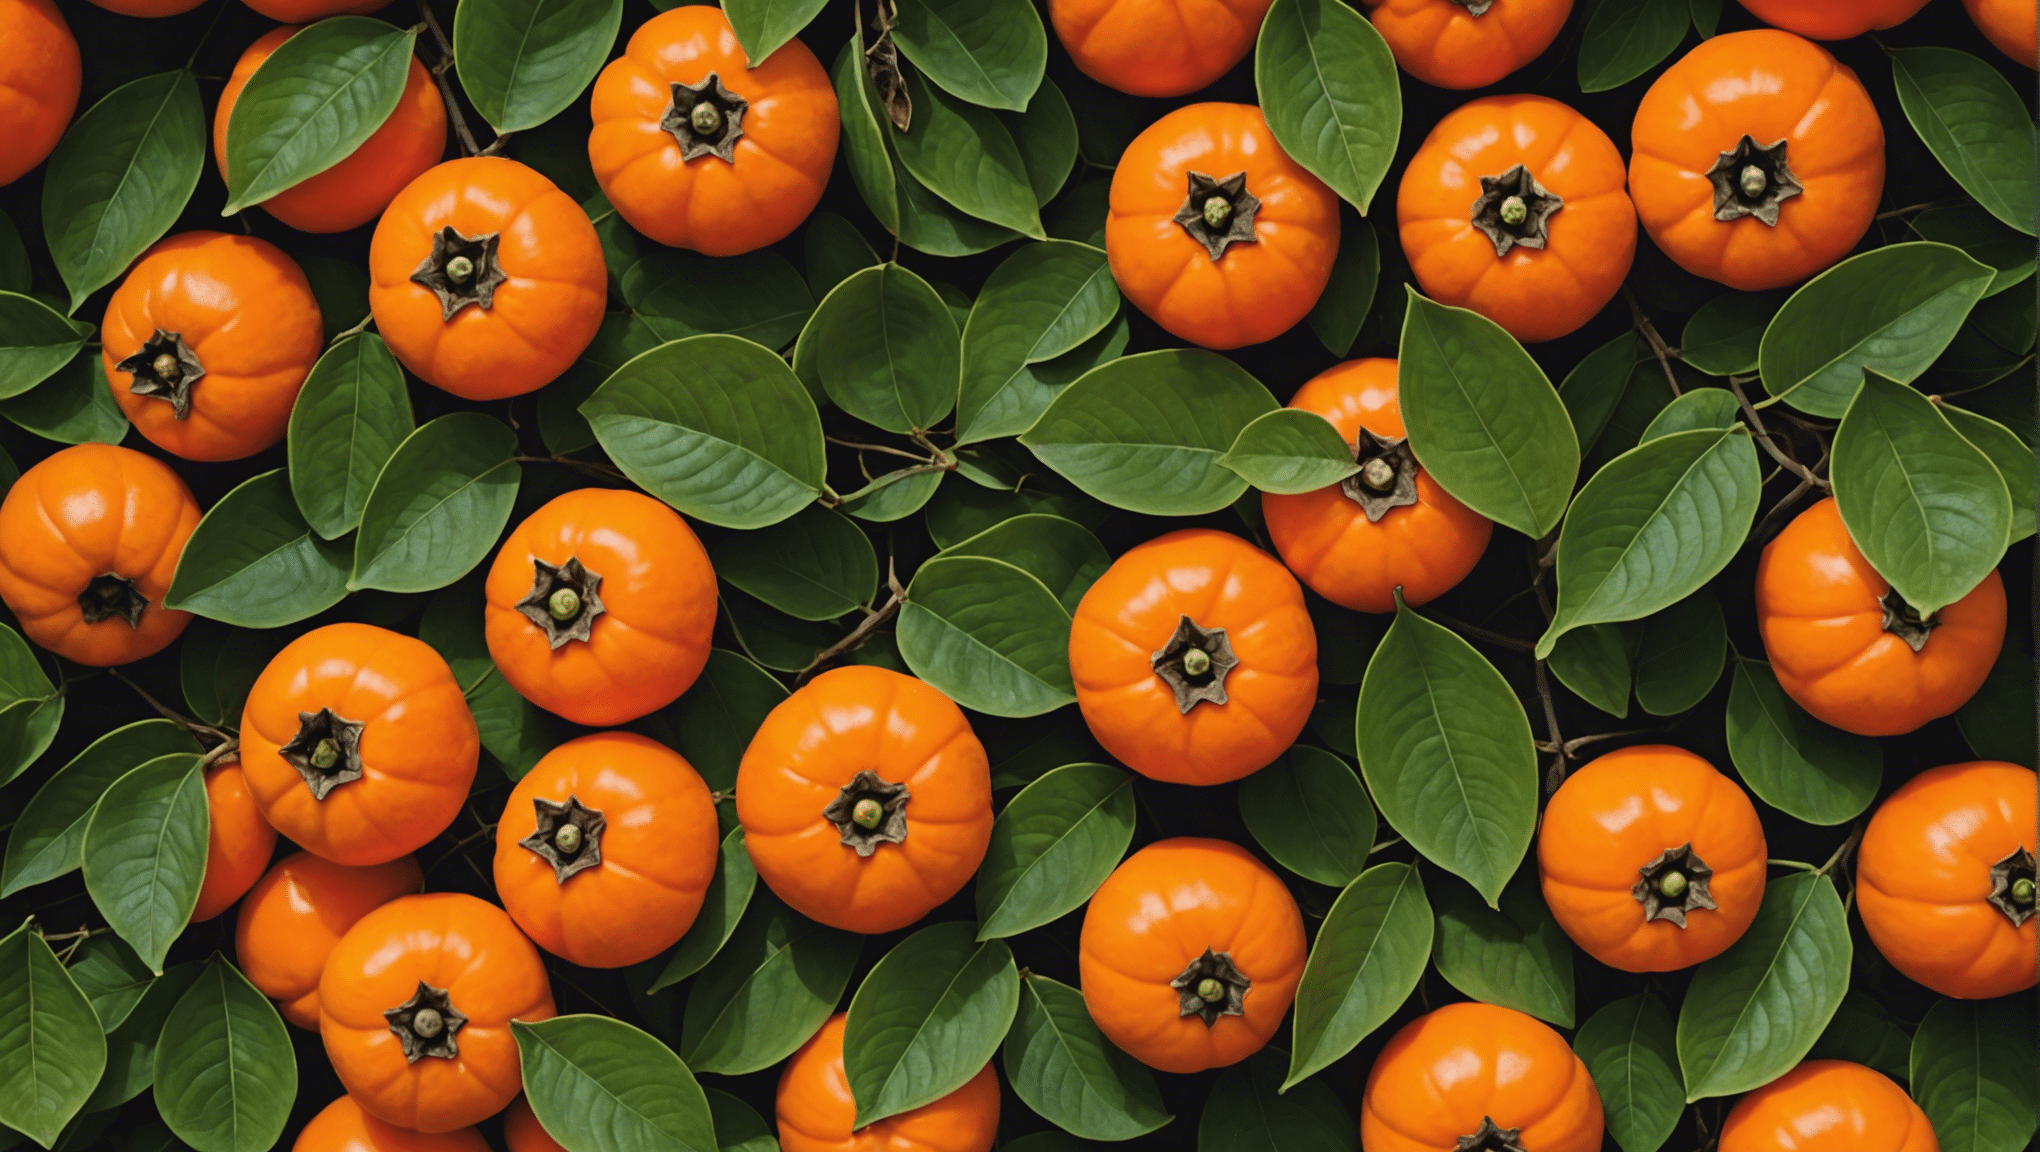 discover the fascinating connection between persimmon seeds and weather prediction in this intriguing article. learn how persimmon seeds are used to forecast the weather in this gripping piece of writing.